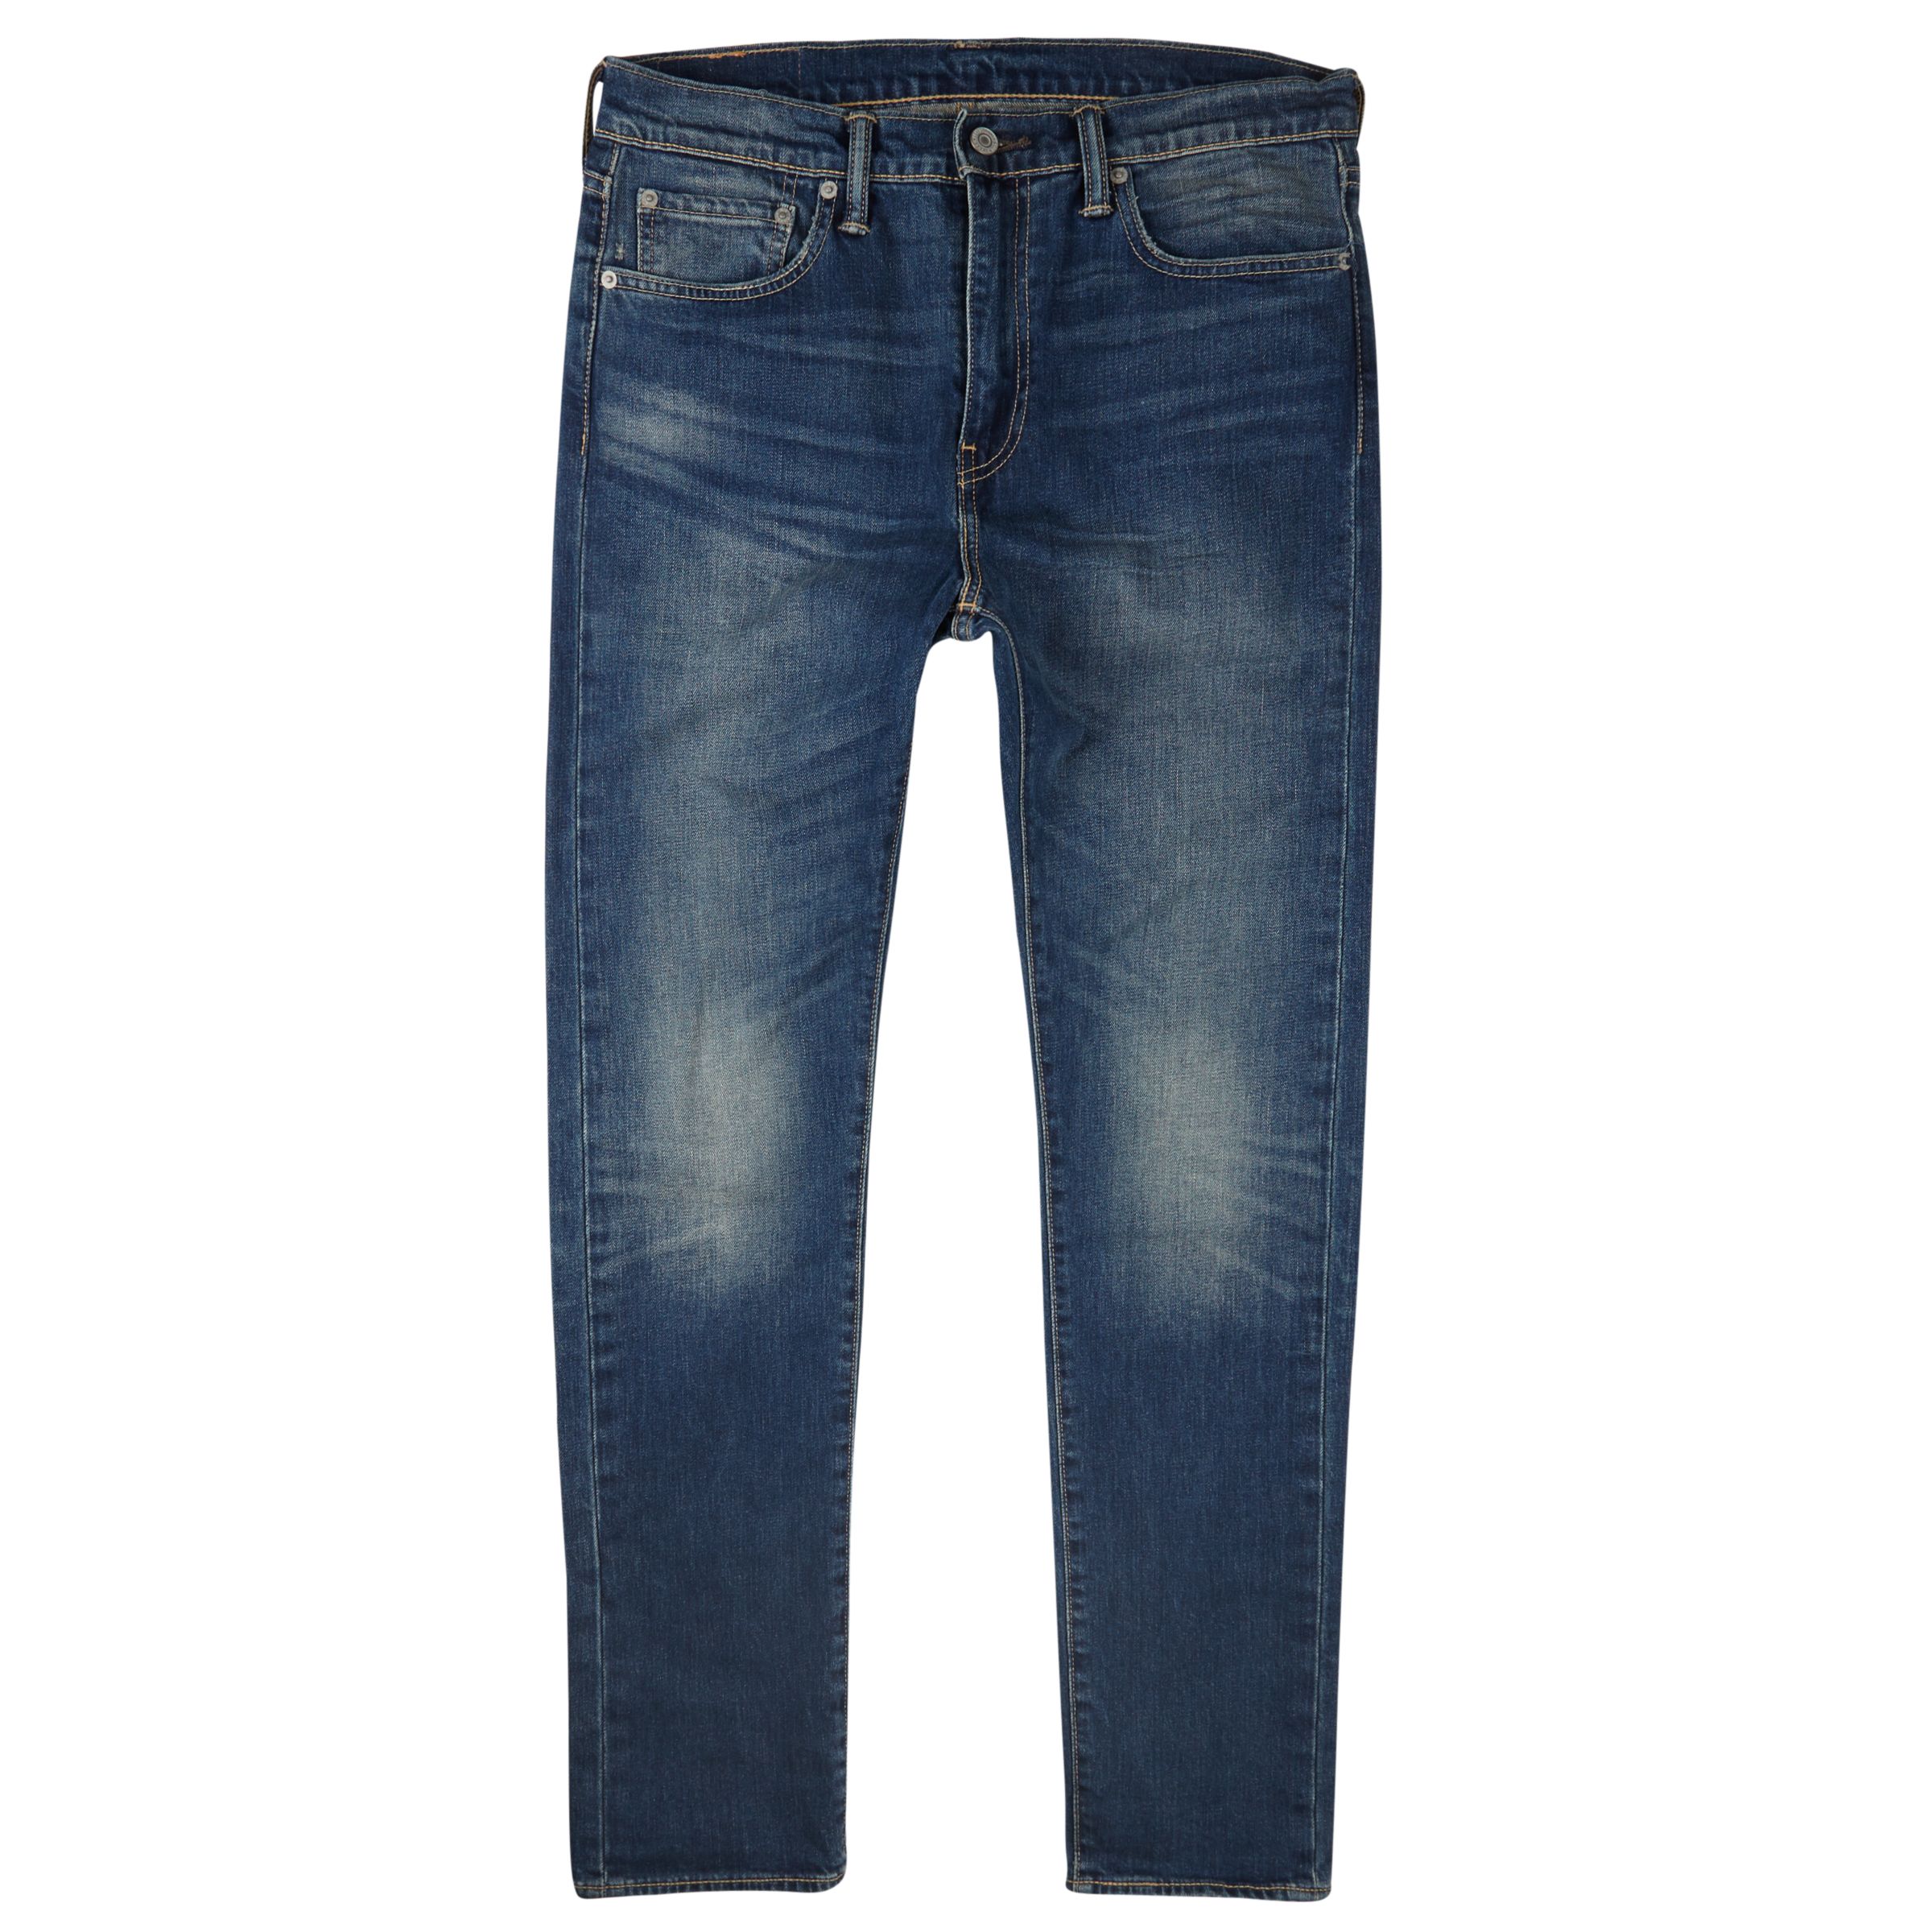 510 Blue Canyon Skinny Jeans, Mid Wash 